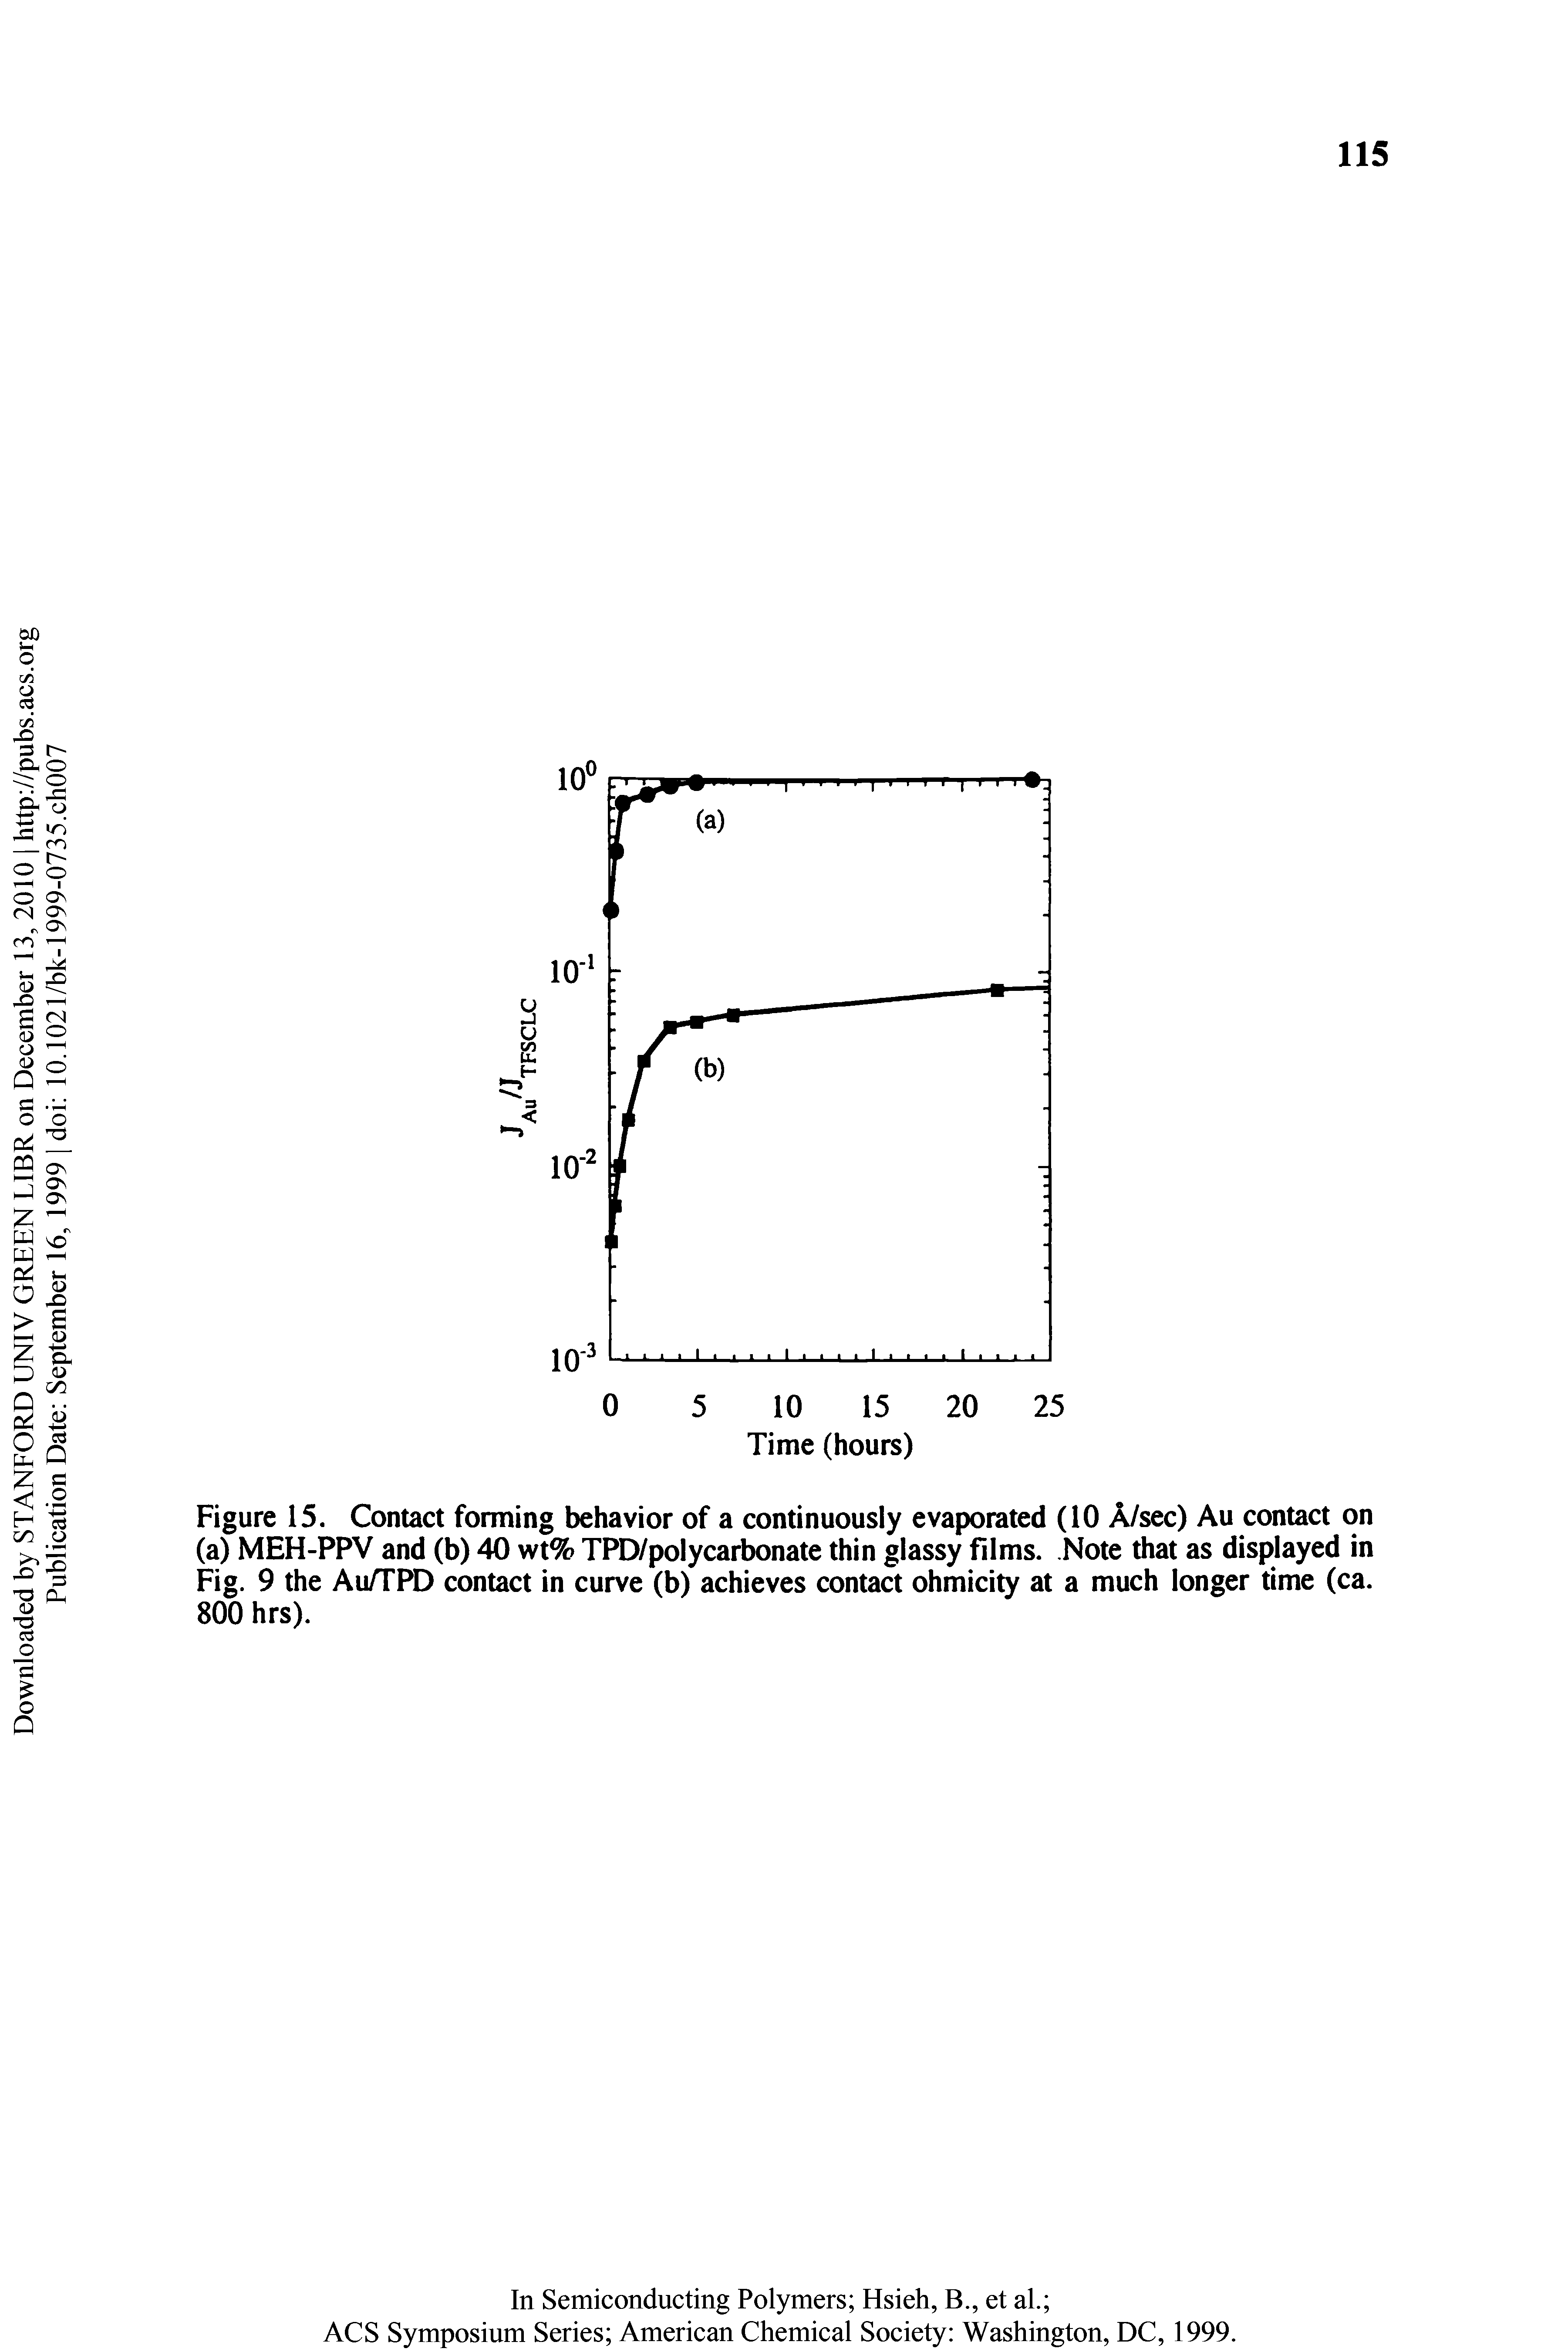 Figure 15. Contact forming behavior of a continuously evaporated (10 A/sec) Au contact on (a) MEH-PPV and (b) 40 wt% TPD/polycarbonate thin glassy films. Note that as displayed in Fig. 9 the Au/TPD contact in curve (b) achieves contact ohmicity at a much longer time (ca. 800 hrs).